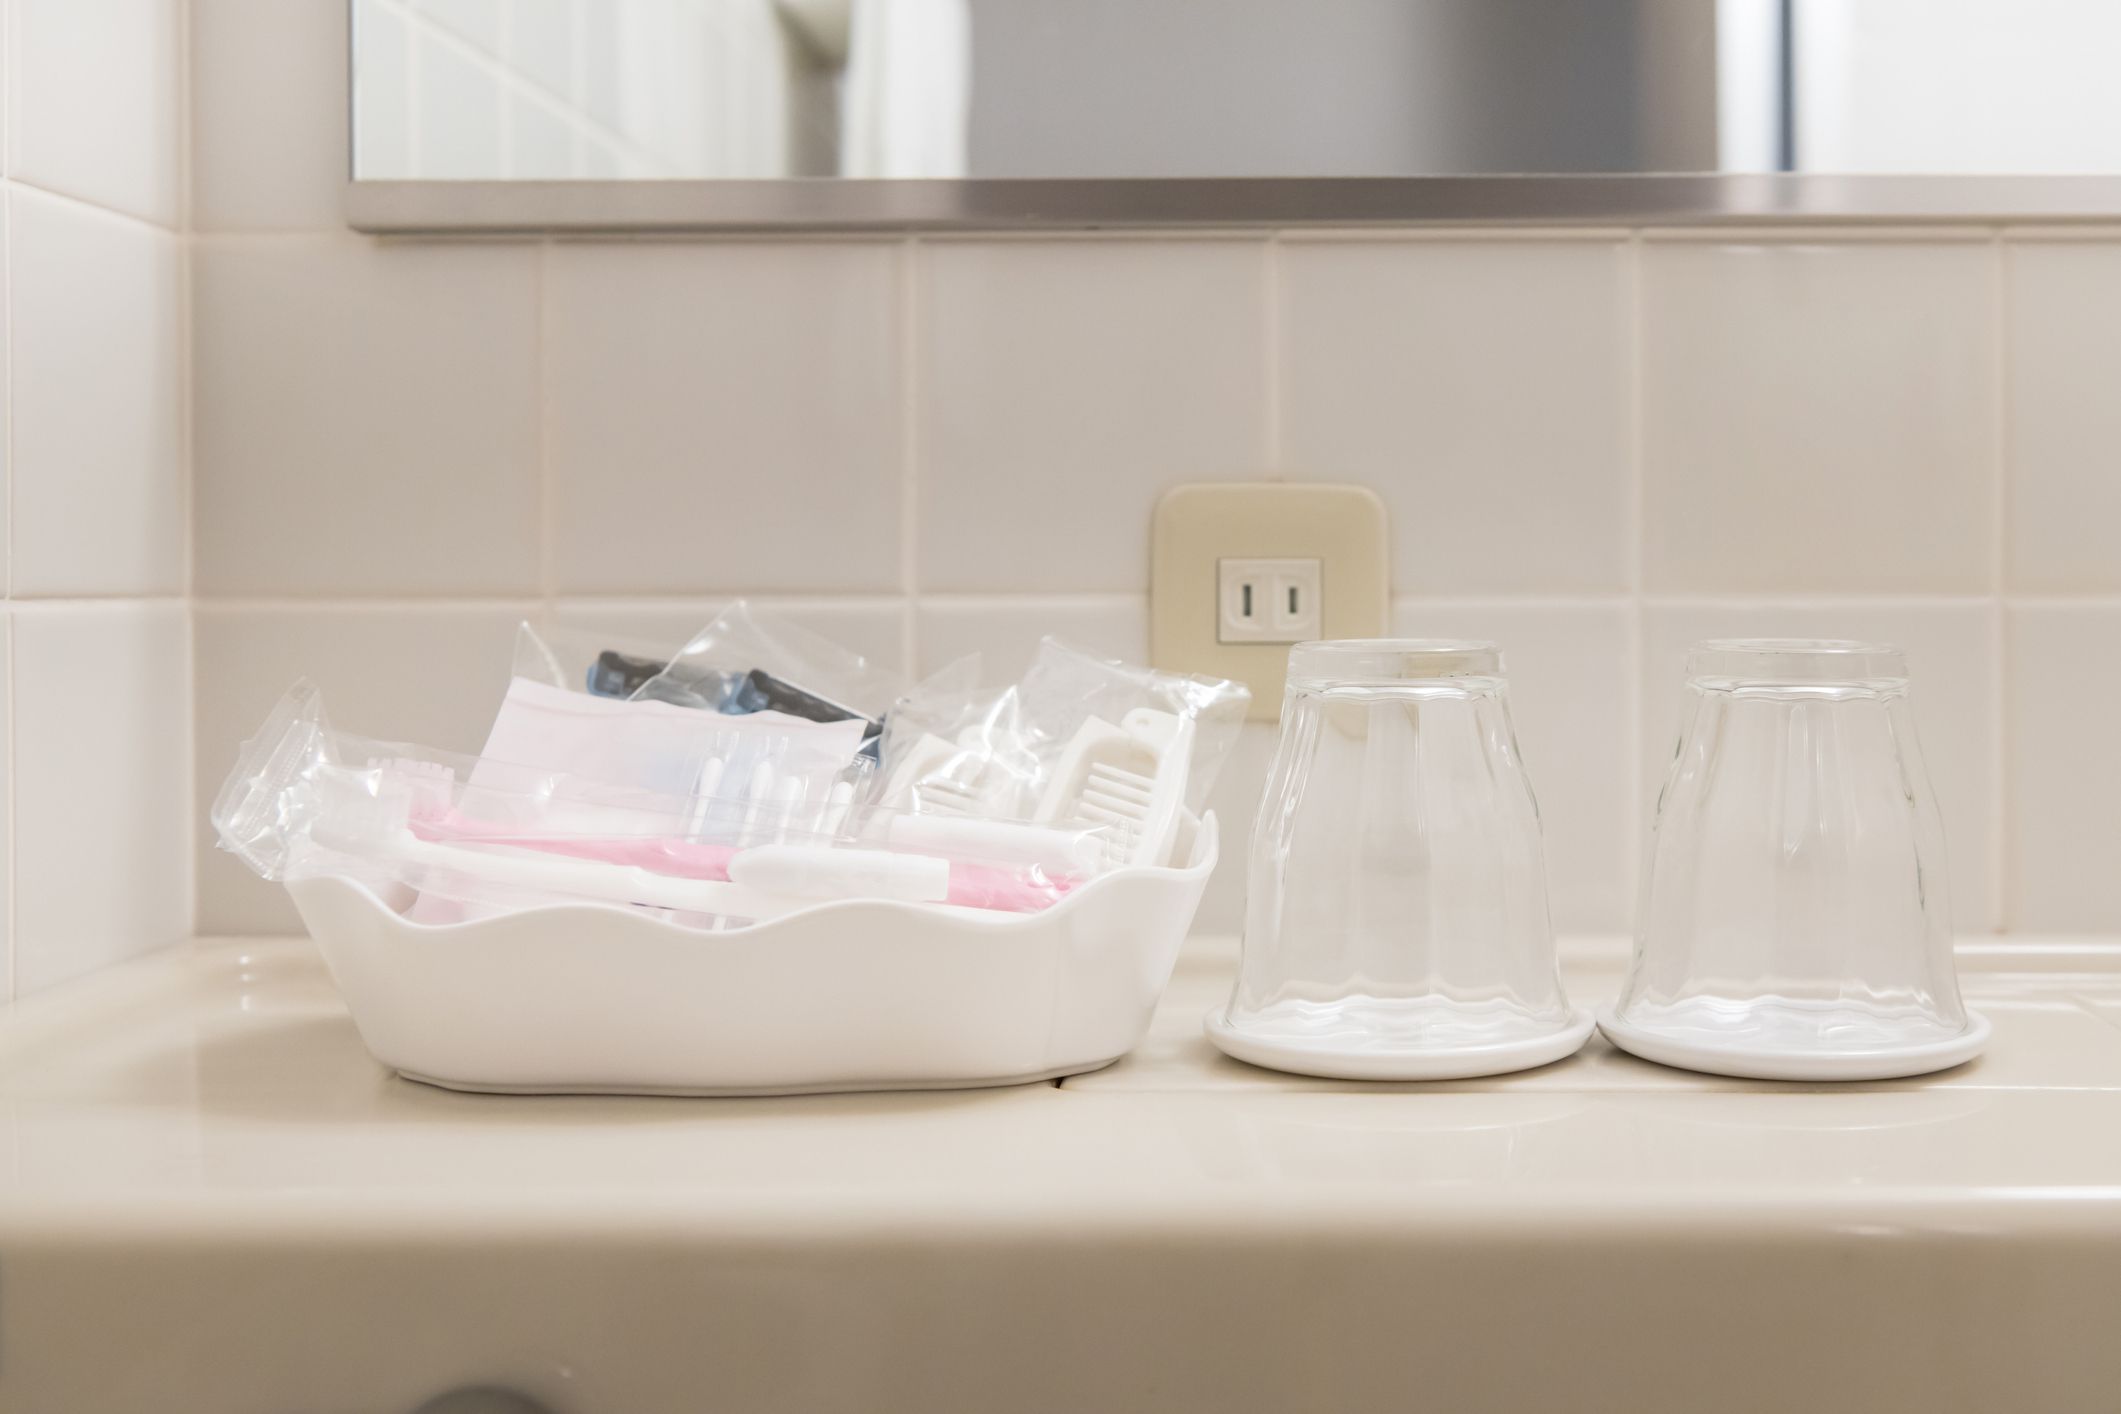 <p>Paper notices, single-use plastics, they’re all being phased out of hotels. As travelers vocalize a preference for sustainability practices, the industry is responding. <a href="https://www.hotelmanagement.net/development/accor-to-eliminate-single-use-plastics#:~:text=Accor%20has%20committed%20to%20eliminating,with%20varying%20degrees%20of%20action.">Hotel groups like Accor</a> have been removing individual plastic toiletry amenities and single-use plastic items since 2020. And a bill in Hawaii, <a href="https://go.skimresources.com/?id=108360X1565867&sref=https%3A%2F%2Fthepointsguy.com%2Fnews%2Fhawaii-looking-to-ban-single-use-toiletries&url=https%3A%2F%2Fwww.capitol.hawaii.gov%2Fmeasure_indiv.aspx%3Fbilltype%3DHB%26billnumber%3D1645%26year%3D2022">HB1645</a>, would “prohibit hotels with 50 or more beds from handing out personal care products in small plastic bottles in 2024 and 2025." </p>